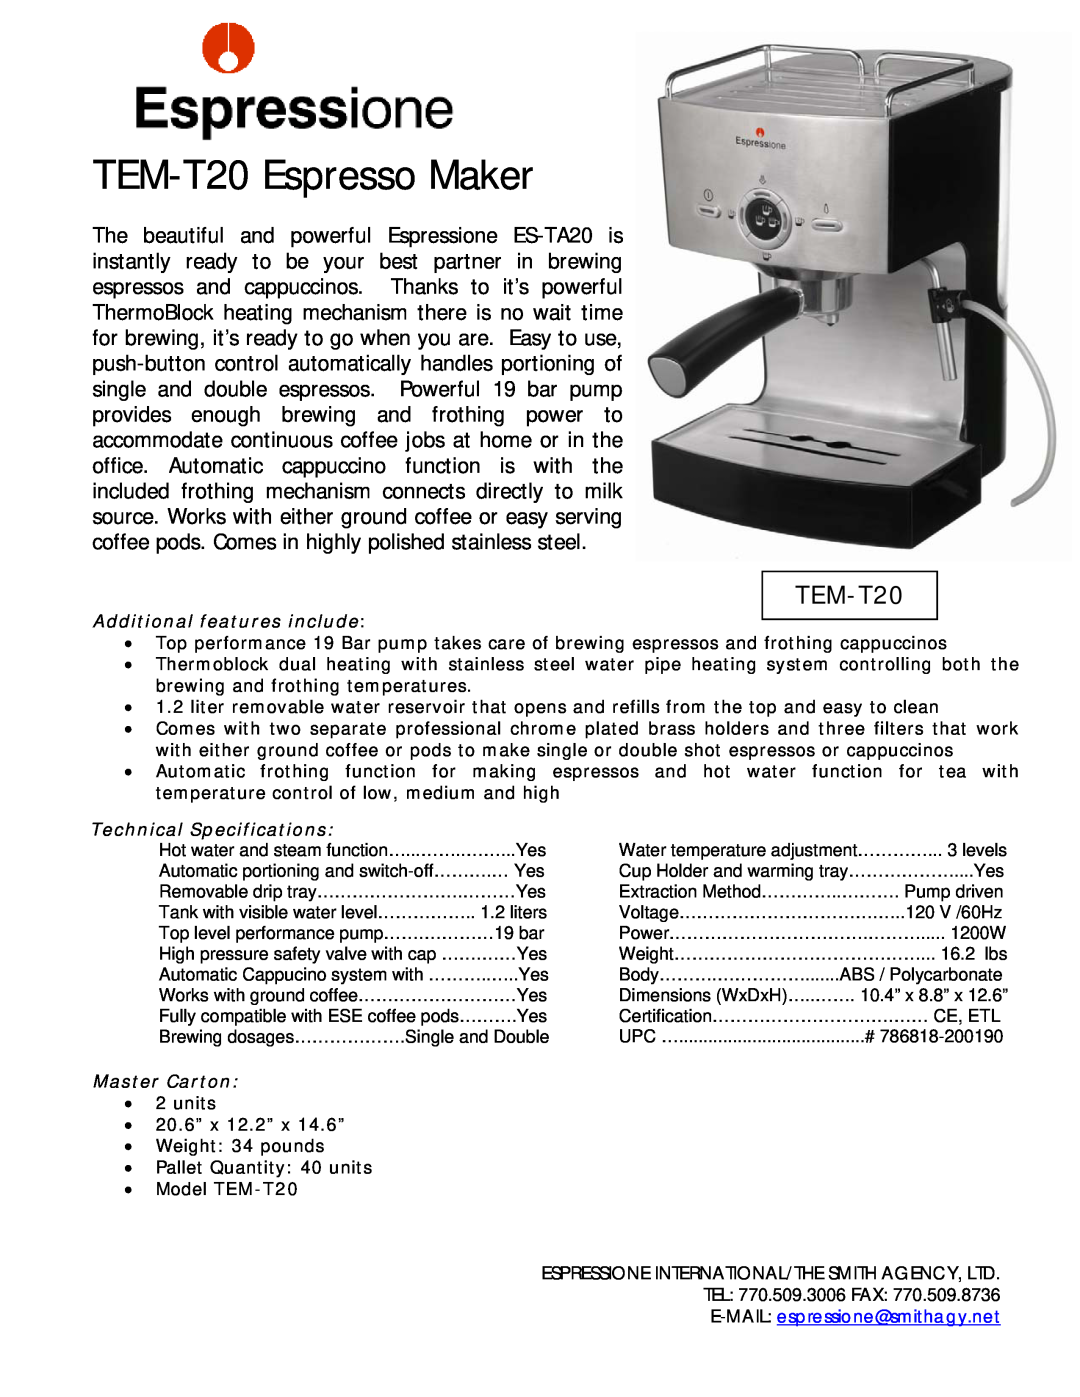 Dualit technical specifications TEM-T20Espresso Maker, Additional features include, Technical Specifications 